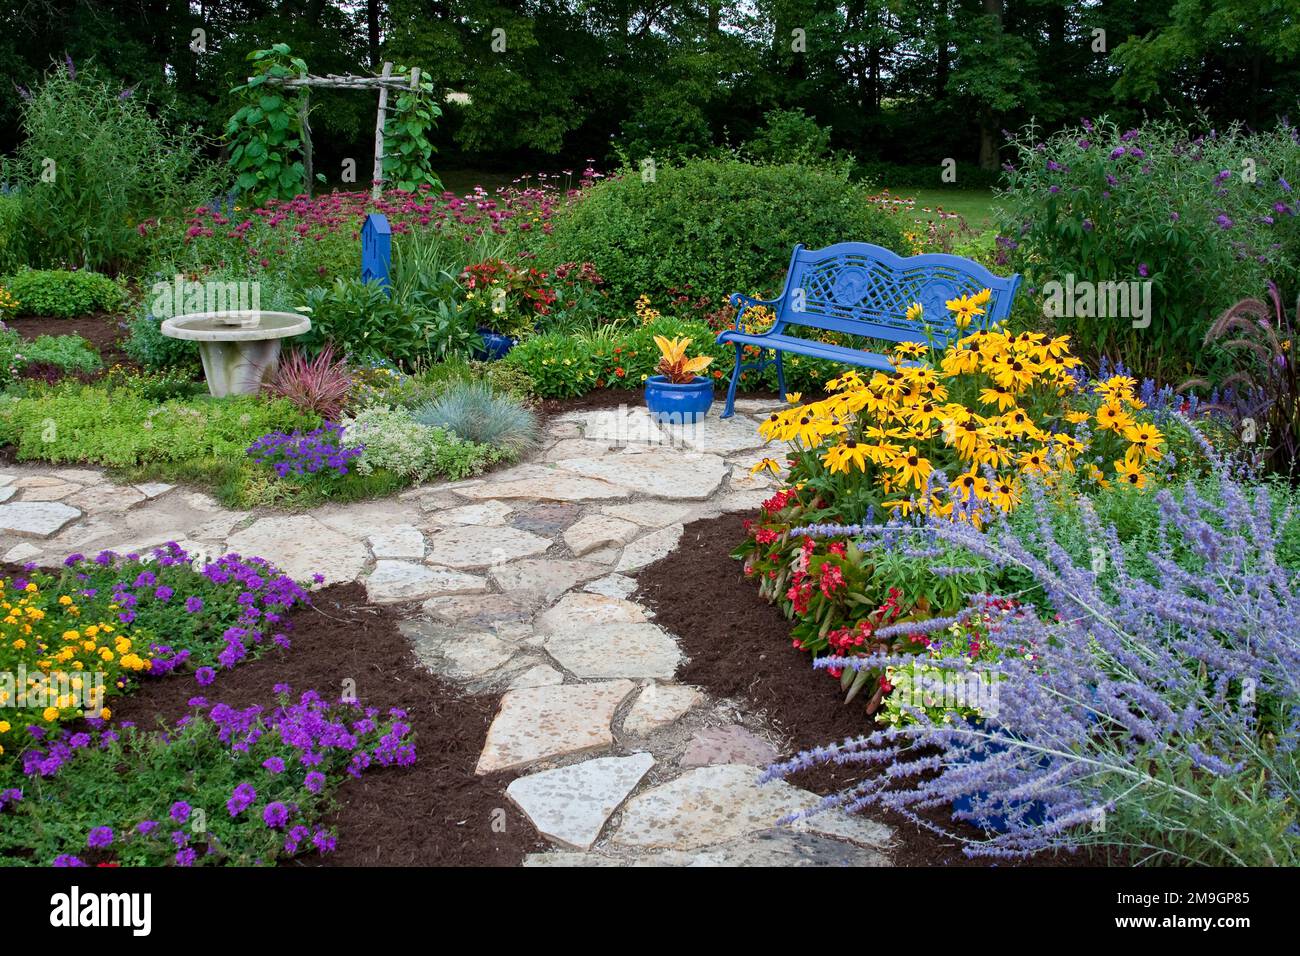 63821-21802 Blue bench, blue pots, butterfly house, bird bath and stone path in flower garden.  Black-eyed Susans (Rudbeckia hirta) Red Dragon Wing Be Stock Photo